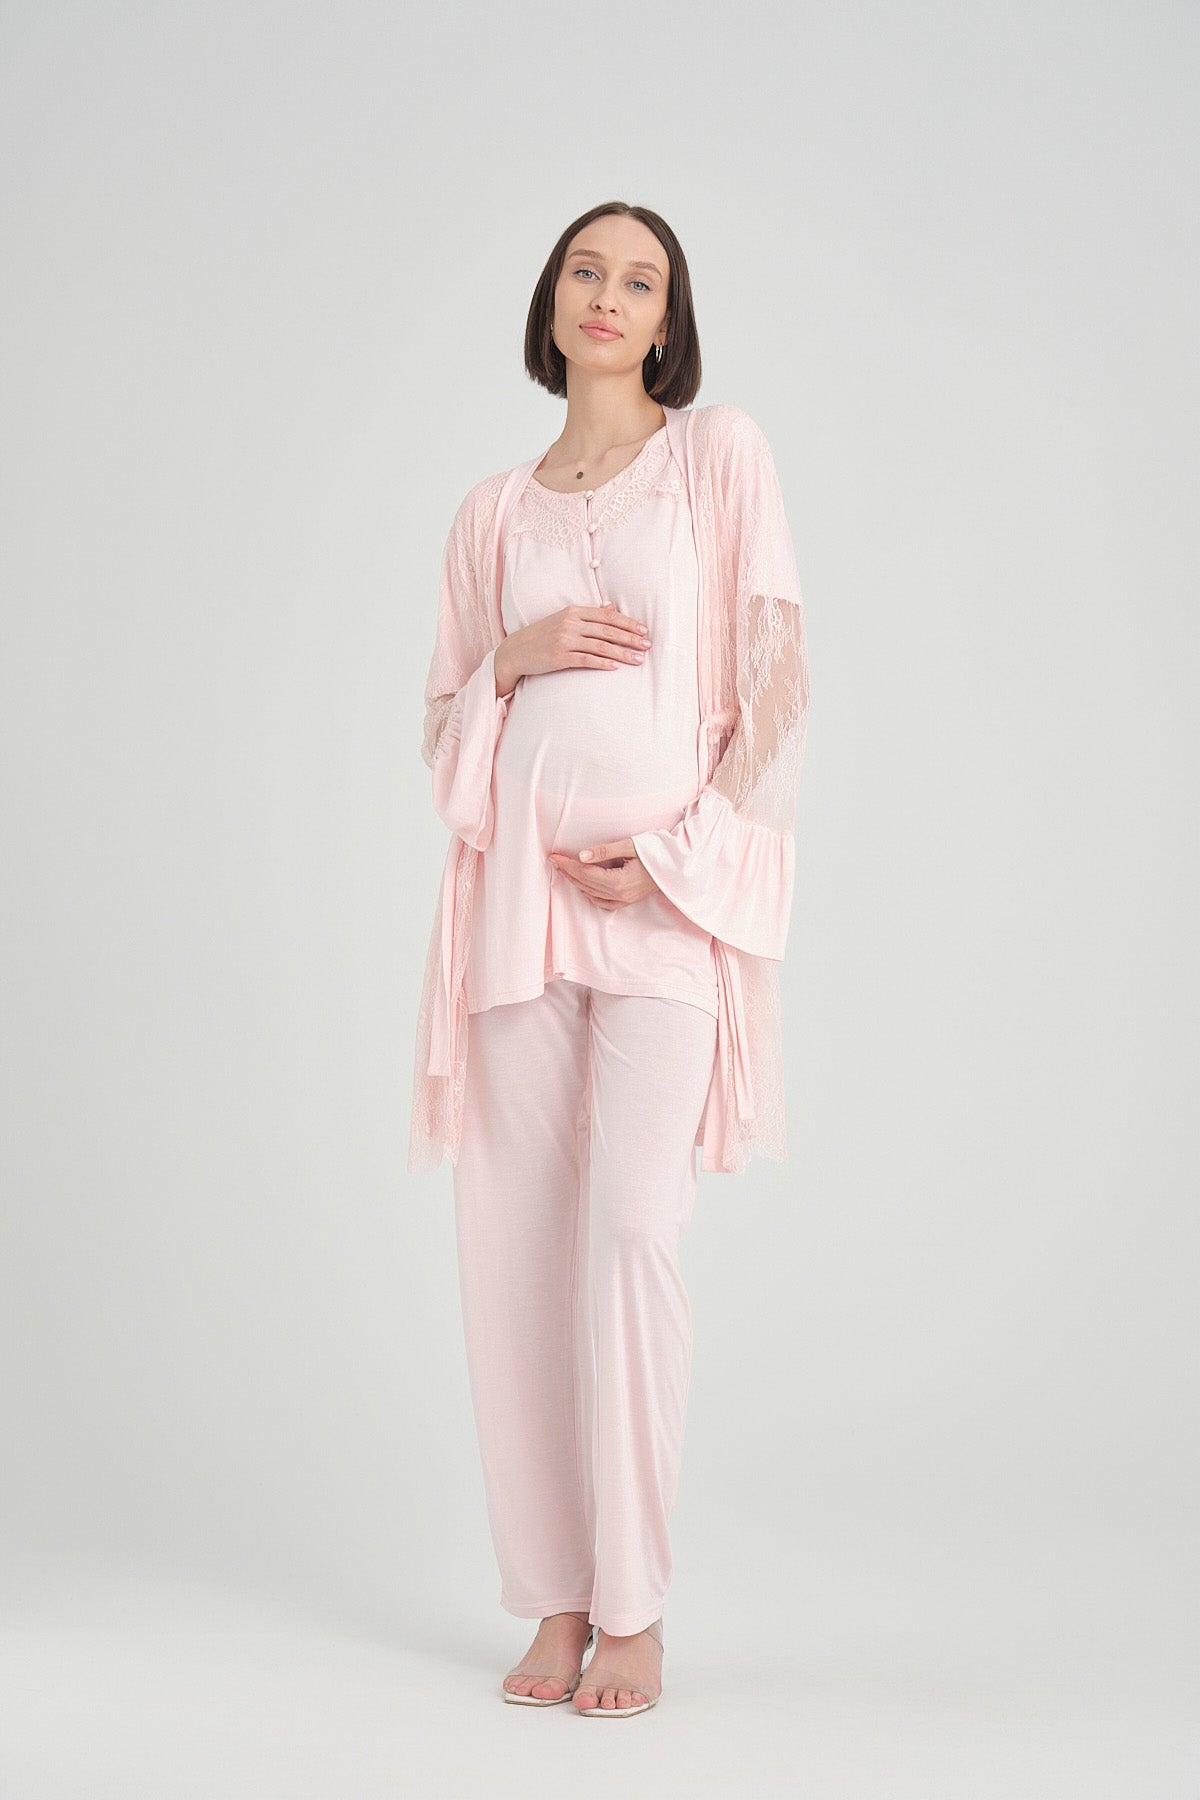 Lace 3-Pieces Maternity & Nursing Pajamas With Embroidered Robe Pink - 2360